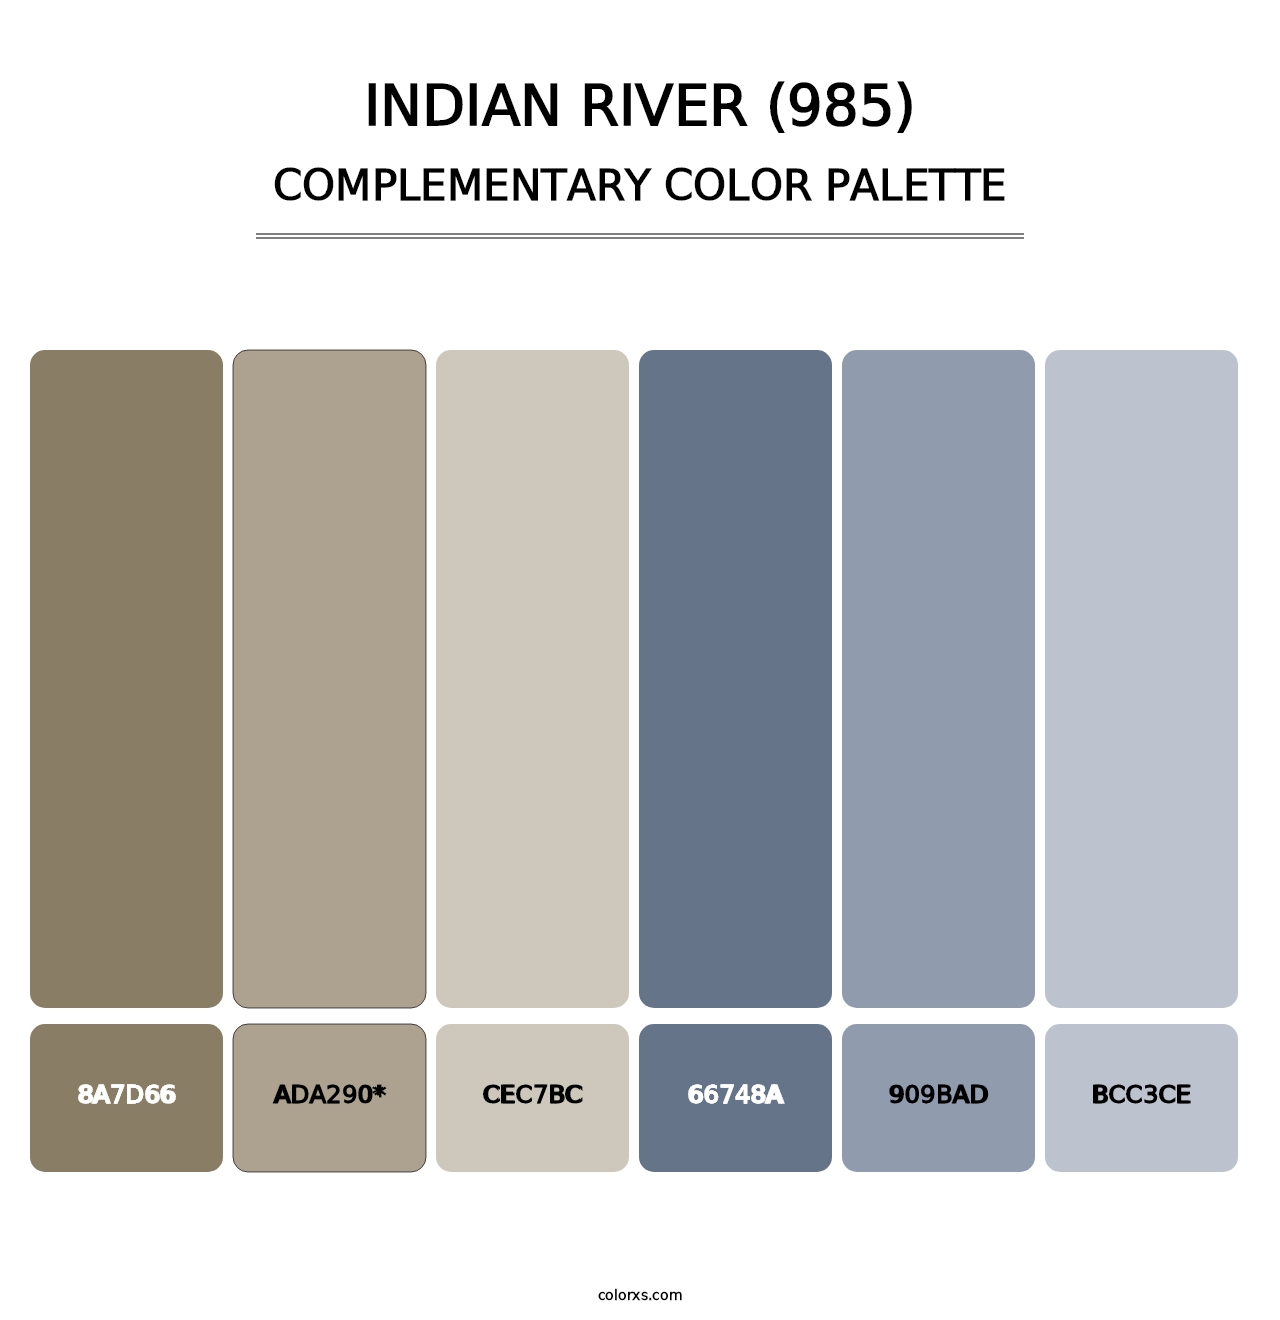 Indian River (985) - Complementary Color Palette